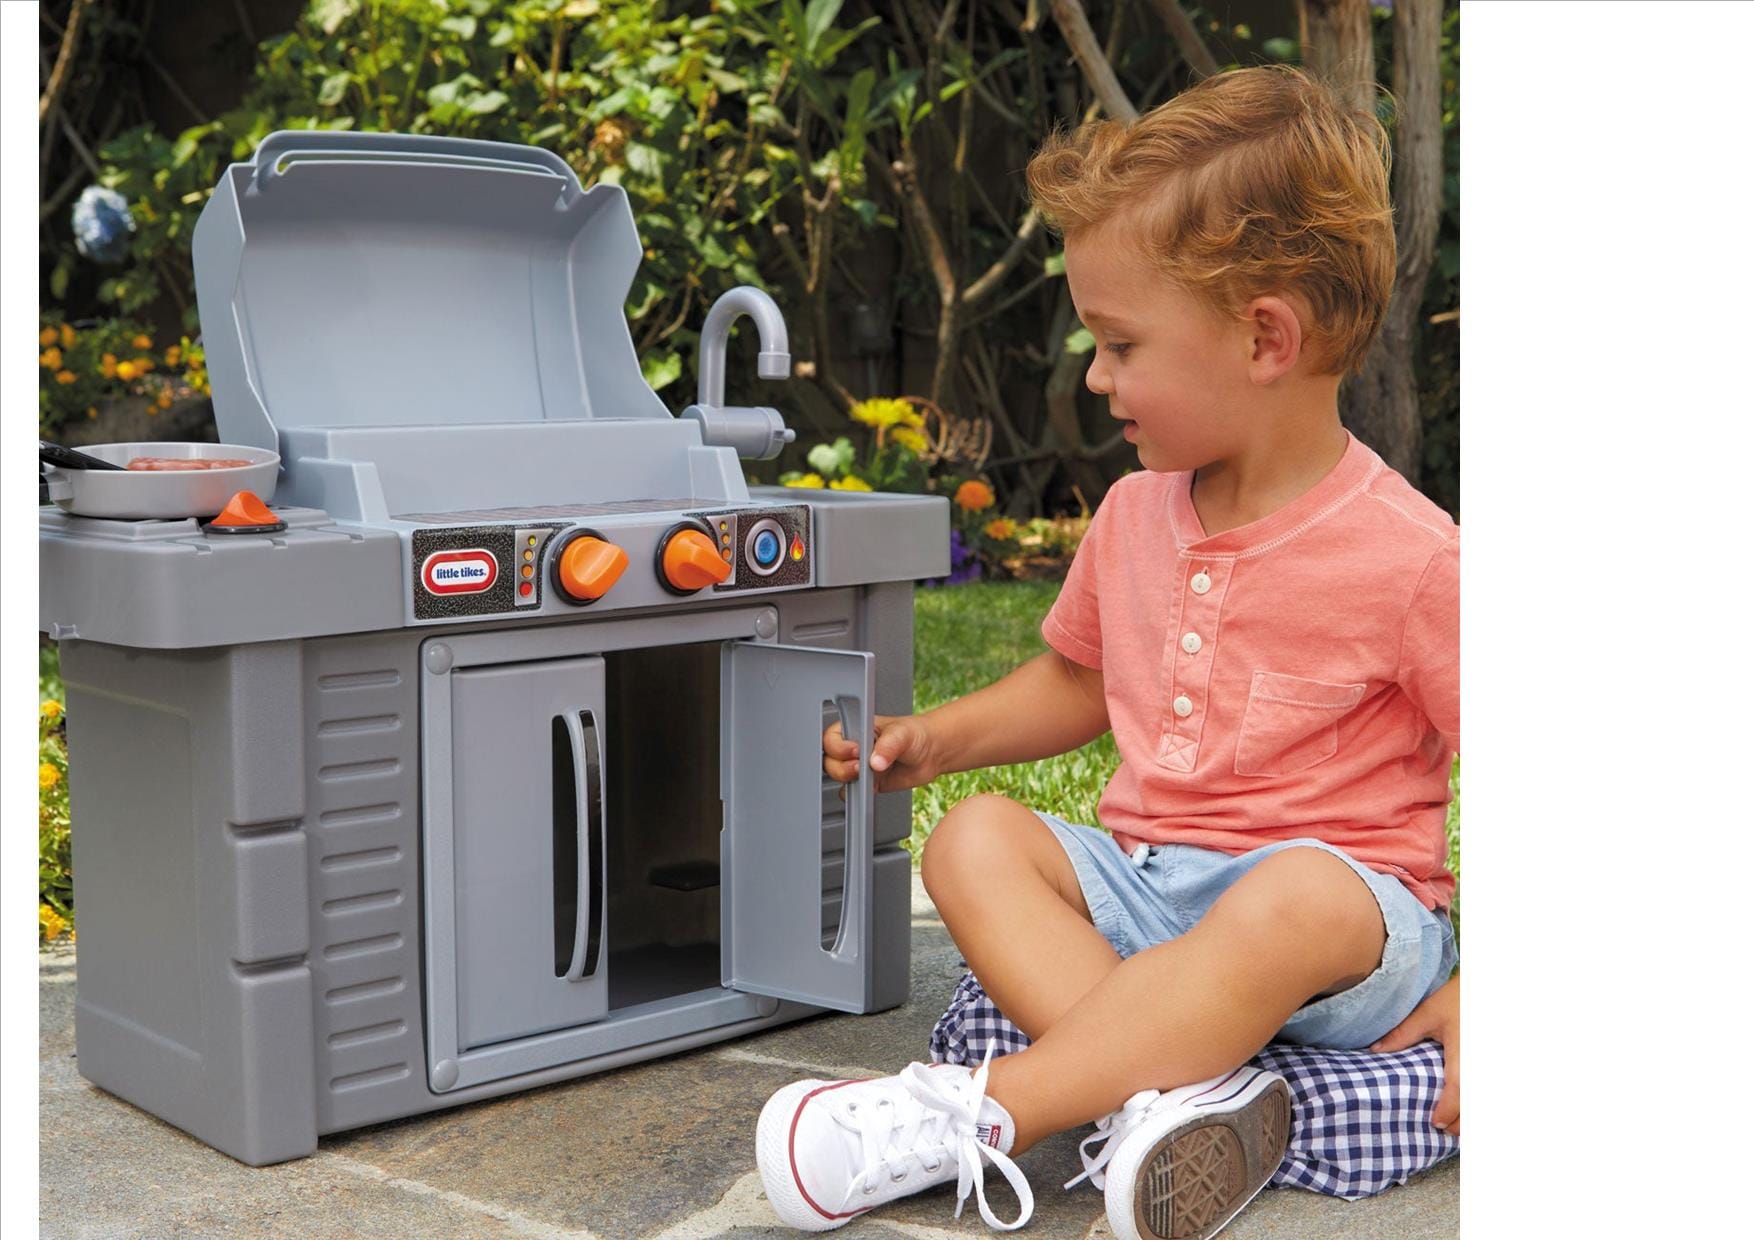 LITTLE TIKES  Cook N Grow Bbq Grill: Anytime is grillin' time with this toy grill barbeque set - 633904